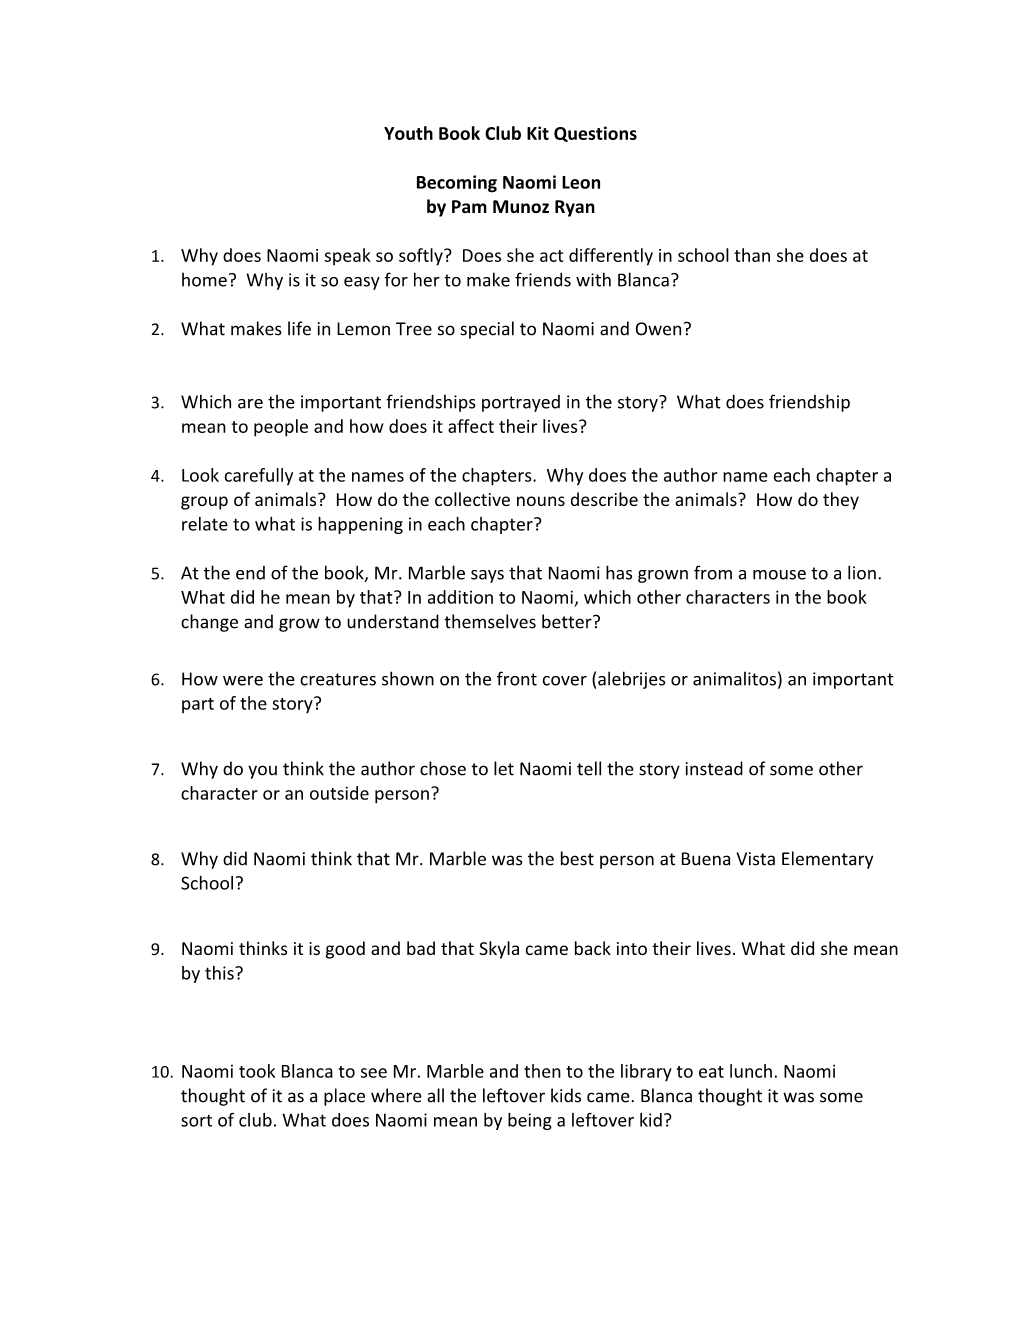 Youth Book Club Kit Questions s2